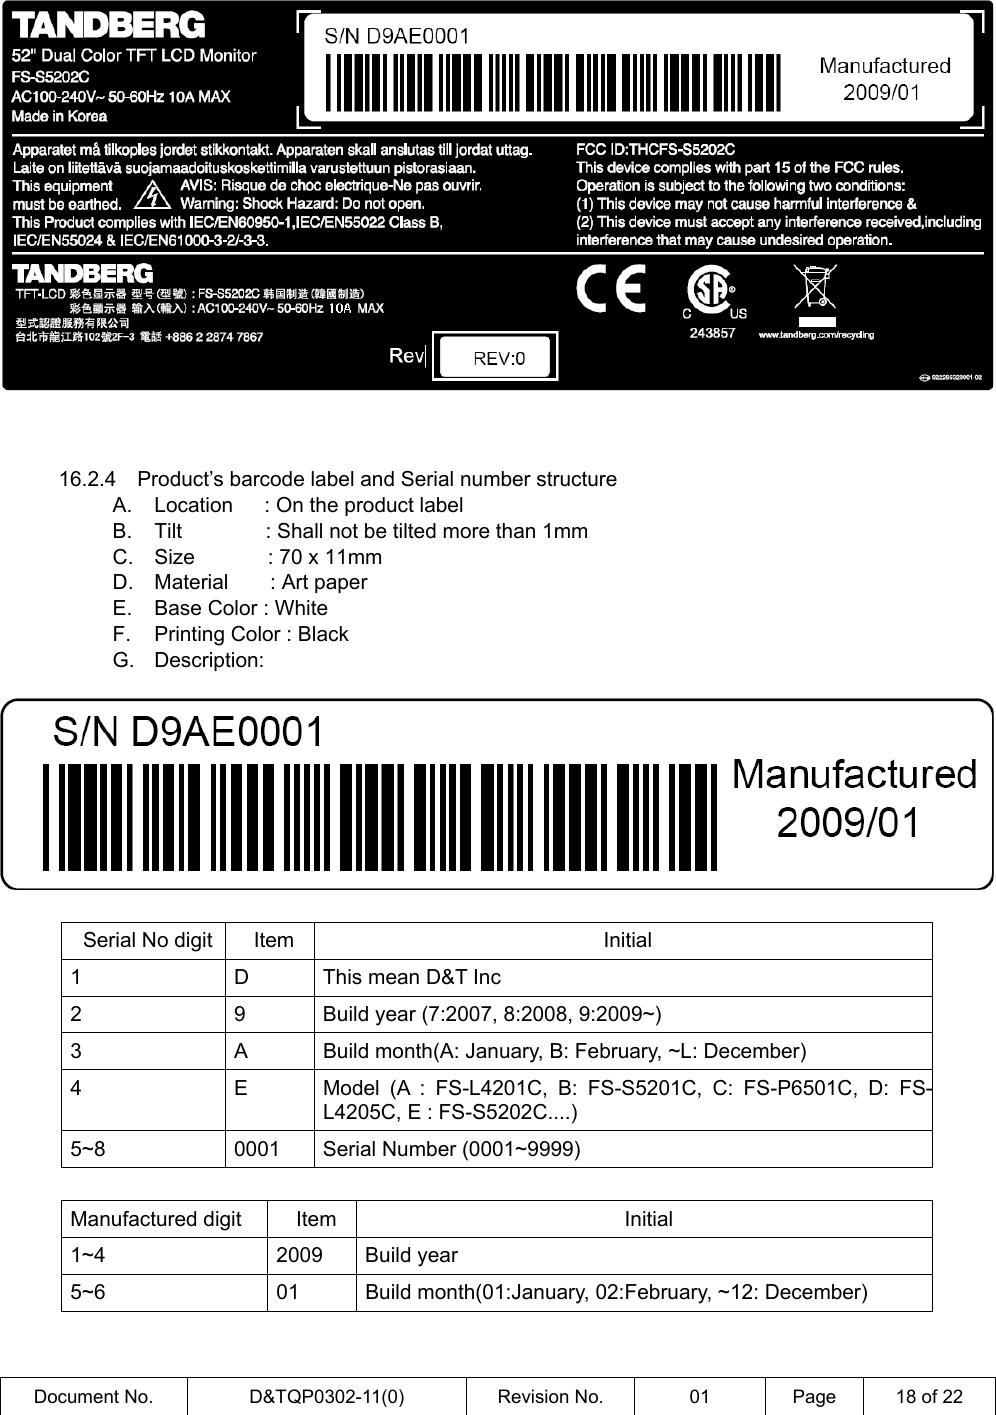  Document No.  D&amp;TQP0302-11(0)  Revision No.  01  Page  18 of 22          16.2.4  Product’s barcode label and Serial number structure A.  Location   : On the product label B.  Tilt        : Shall not be tilted more than 1mm C.  Size       : 70 x 11mm D.  Material    : Art paper E.  Base Color : White F.  Printing Color : Black G. Description:     Serial No digit  Item  Initial 1  D  This mean D&amp;T Inc 2  9  Build year (7:2007, 8:2008, 9:2009~) 3  A  Build month(A: January, B: February, ~L: December) 4  E  Model (A : FS-L4201C, B: FS-S5201C, C: FS-P6501C, D: FS-L4205C, E : FS-S5202C....) 5~8  0001  Serial Number (0001~9999)  Manufactured digit  Item  Initial 1~4 2009 Build year 5~6 01 Build month(01:January, 02:February, ~12: December)  